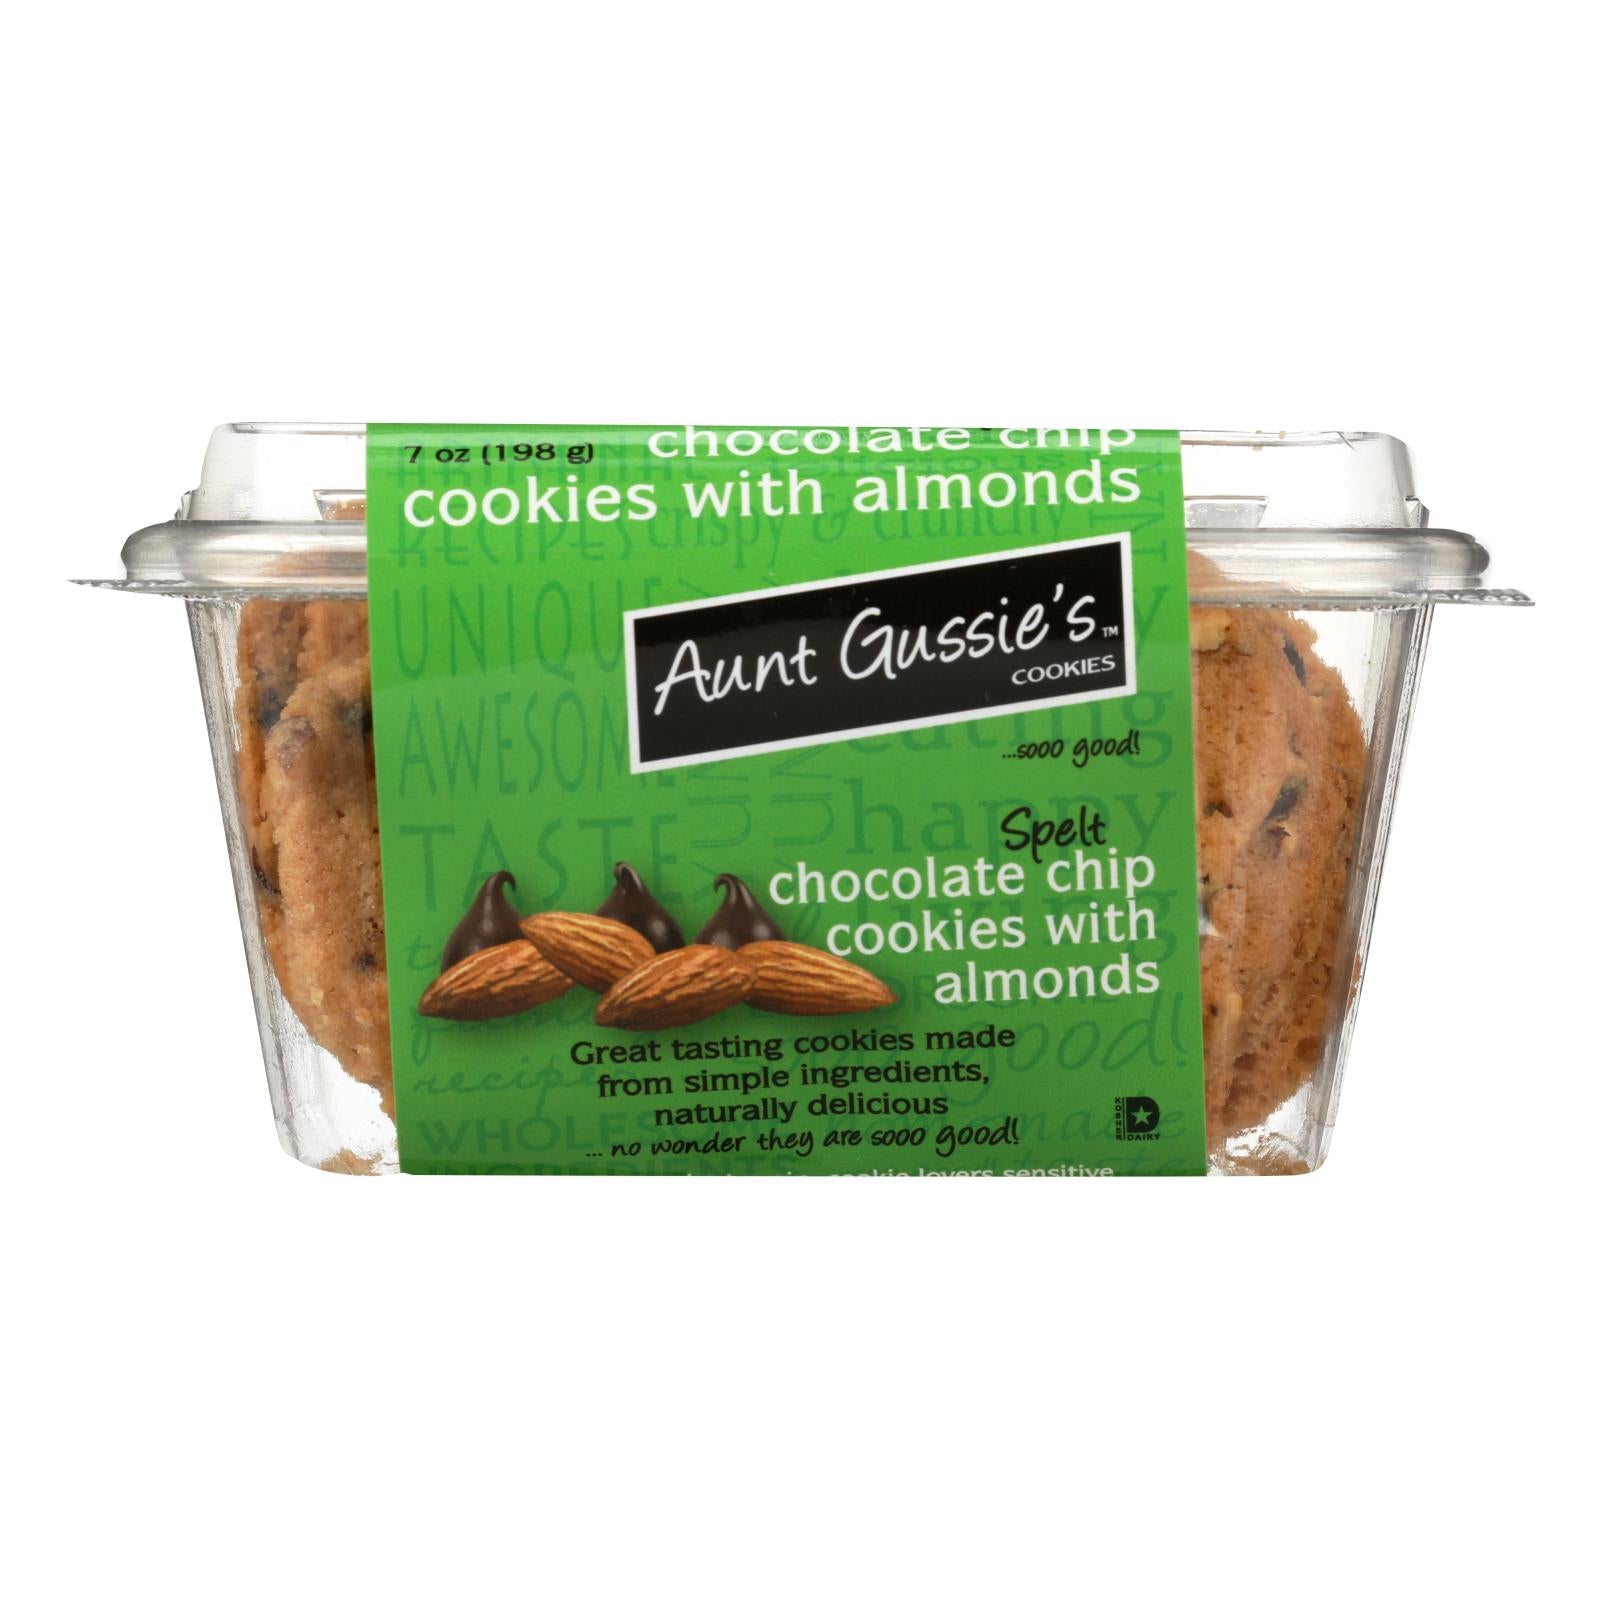 Aunt Gussie'S, Aunt Gussie's Chocolate Chip Cookies and Almonds - Sugar Free - Case of 8 - 7 oz. (Pack of 8)